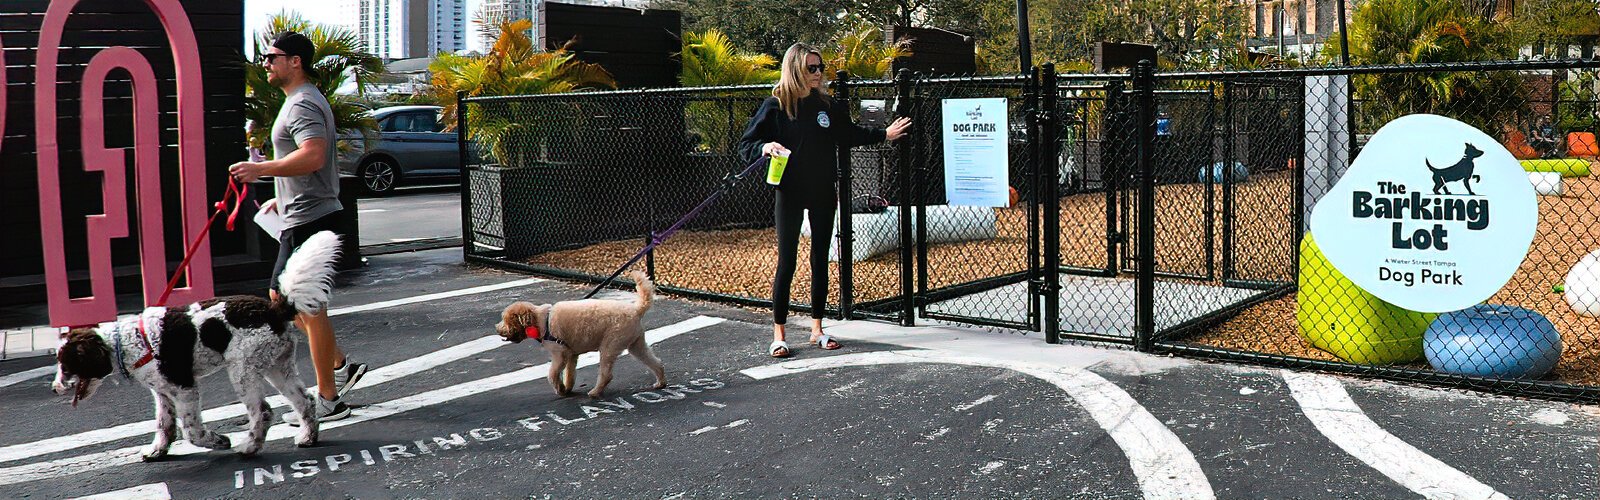 The brand-new Barking Lot dog park is the new lounge and hangout spot for dog lovers and their pooches in this very dog-friendly neighborhood.